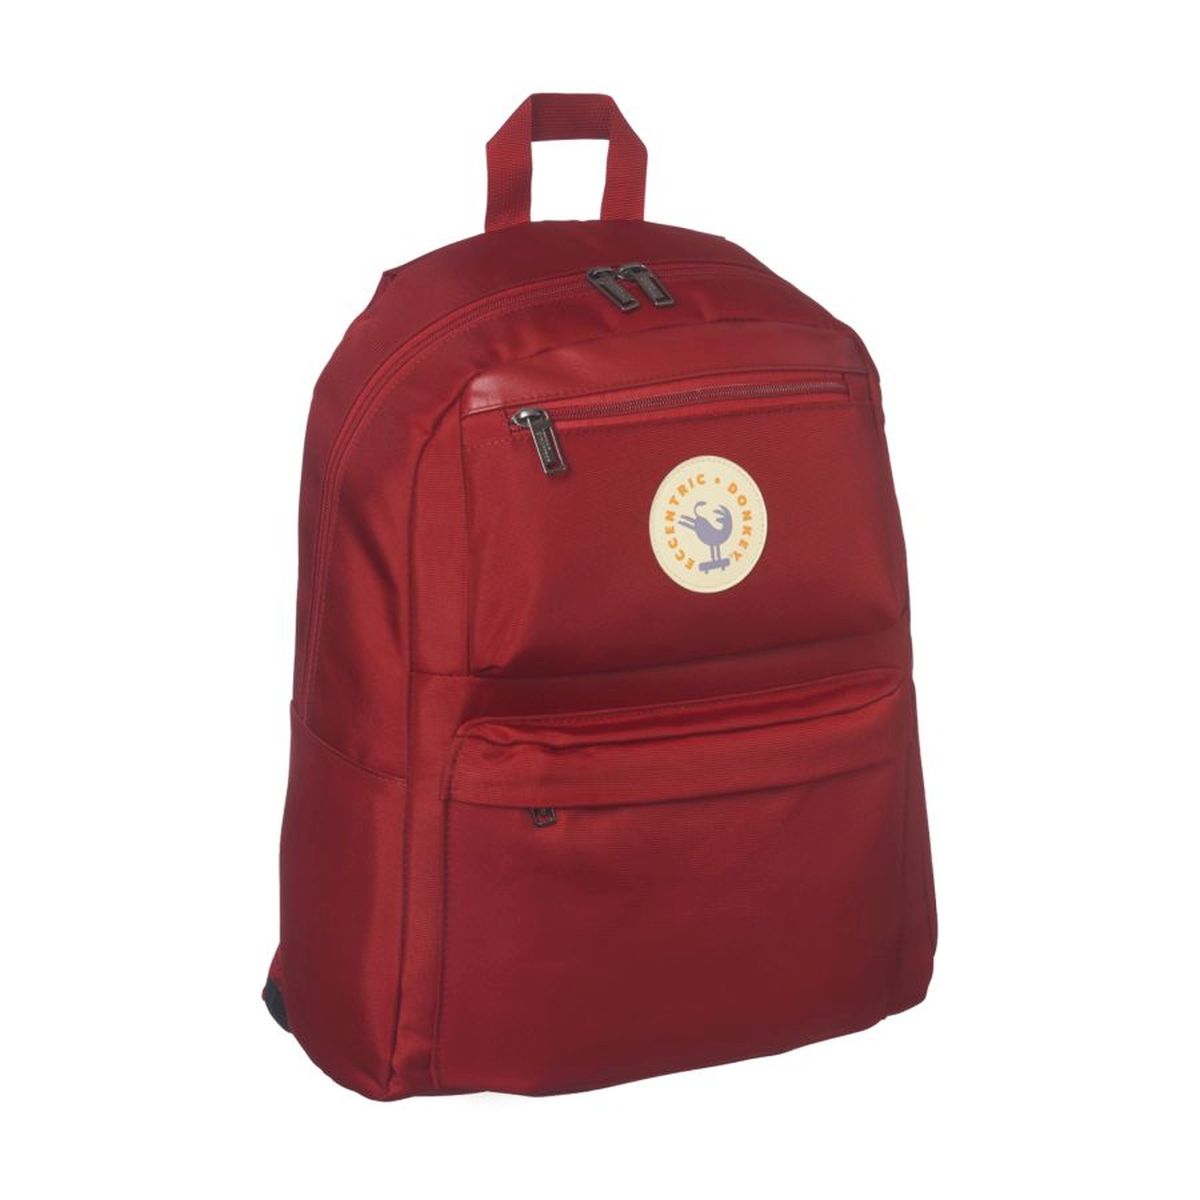 Backpack Poitou Basic Red Two Tone